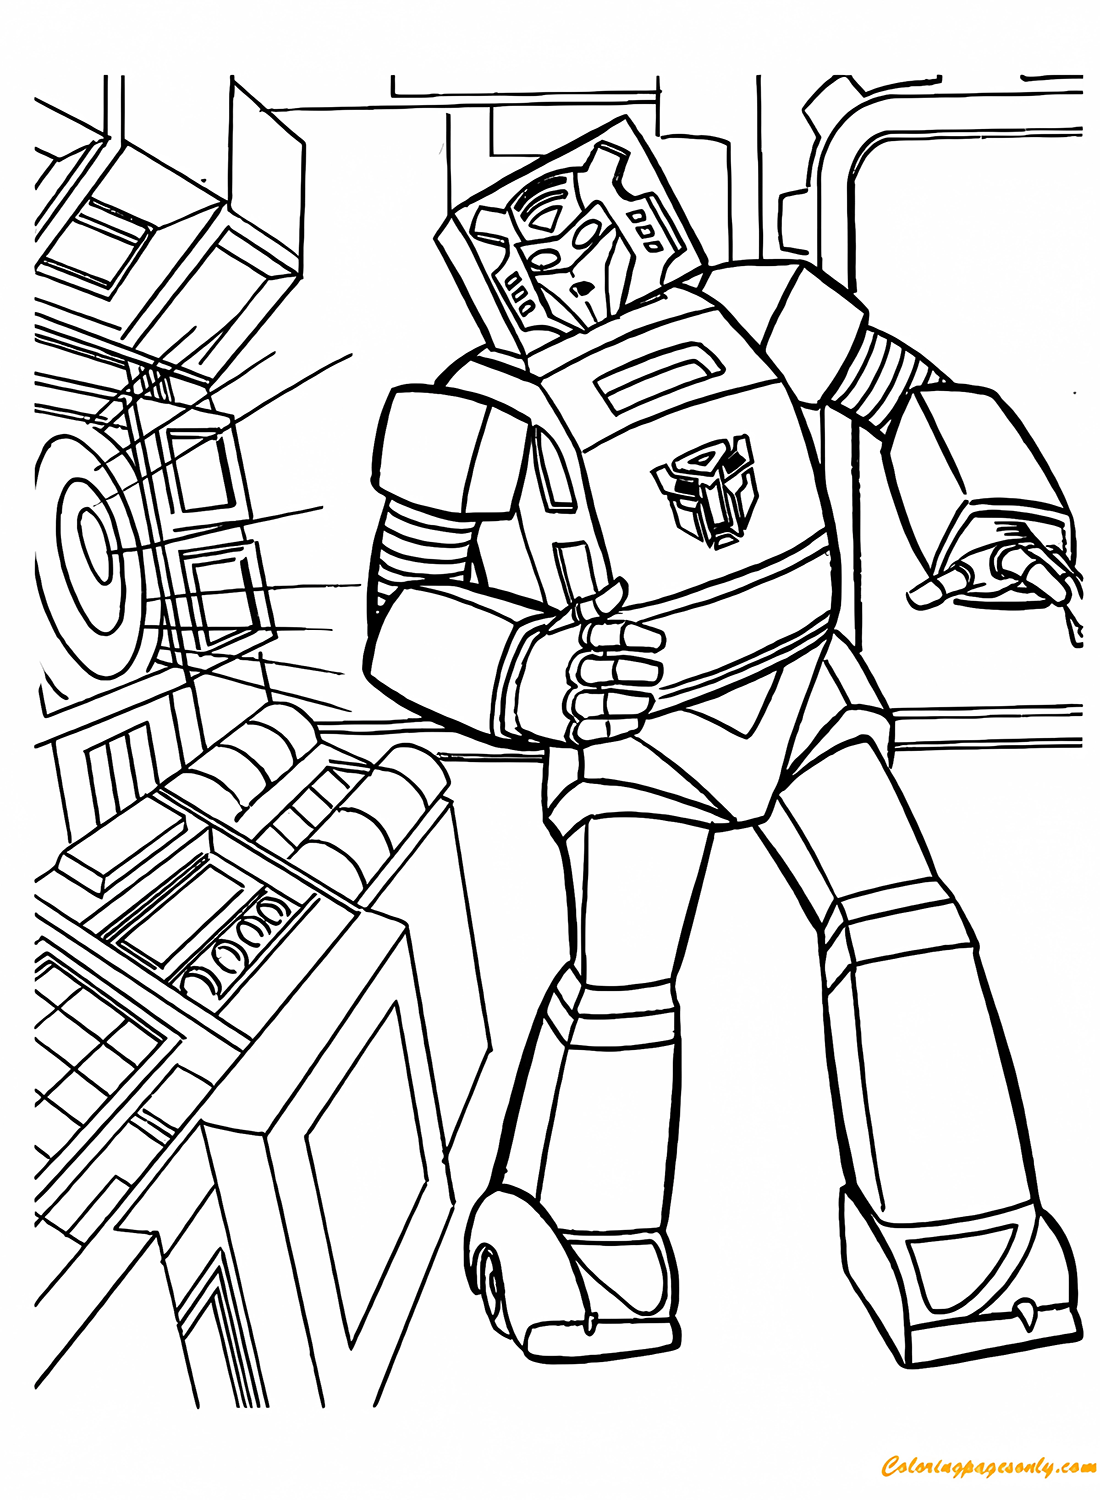 Transformers Bumblebee Listening To Music Coloring Page